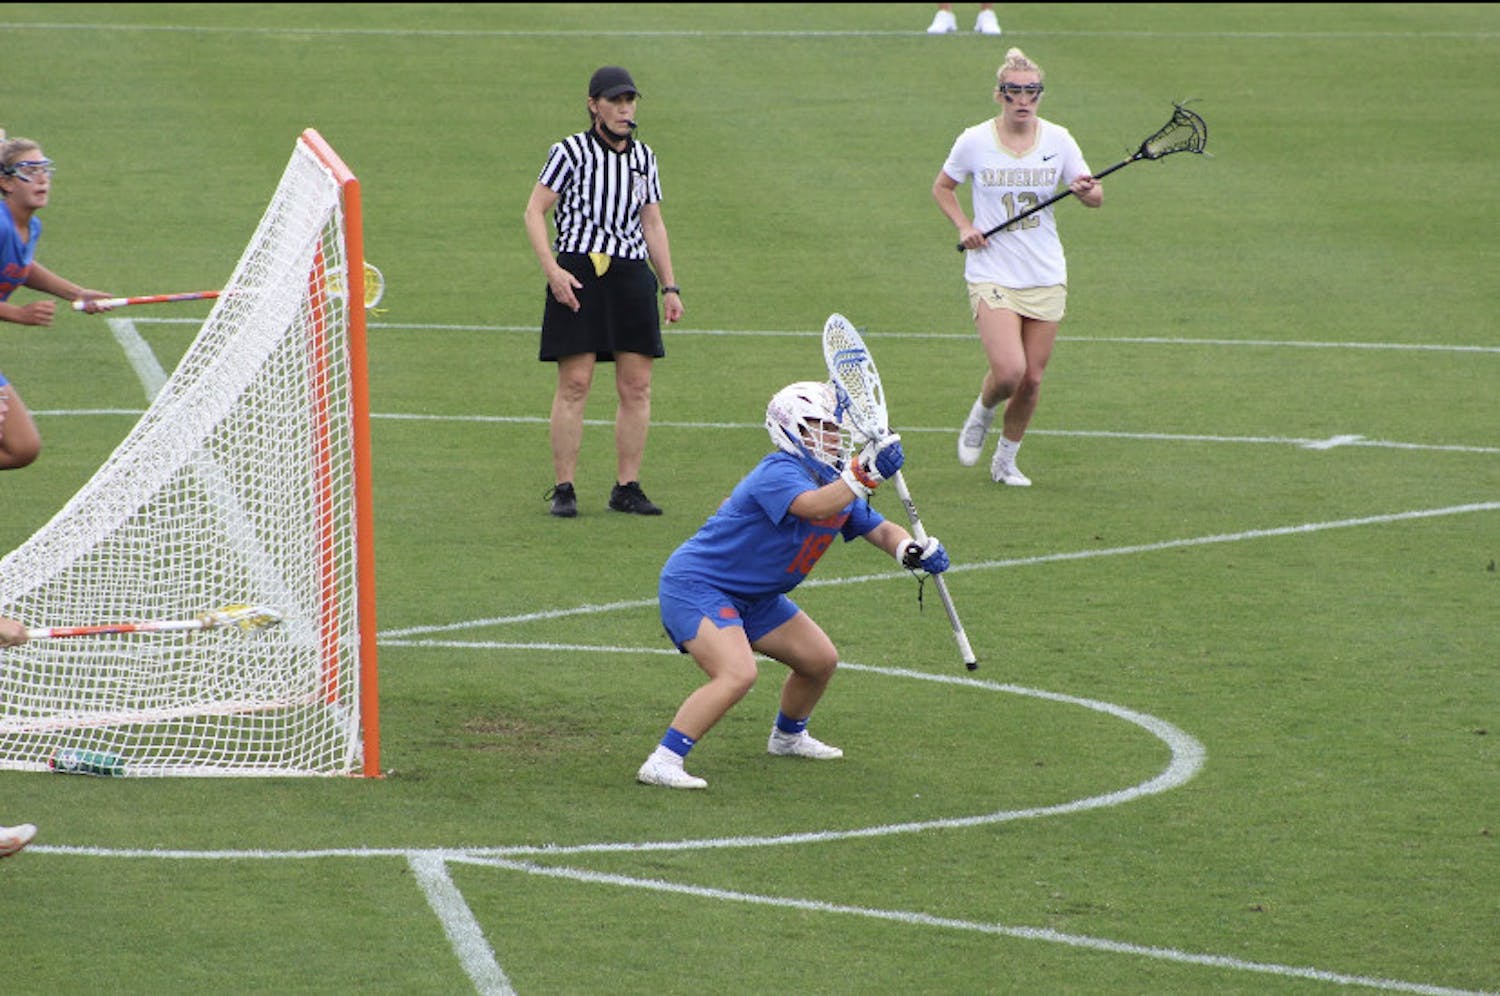 Sarah Reznick guards the net during a rainy conference affair against Vanderbilt 2021. She recorded nine saves in the quarterfinals matchup against Maryland.